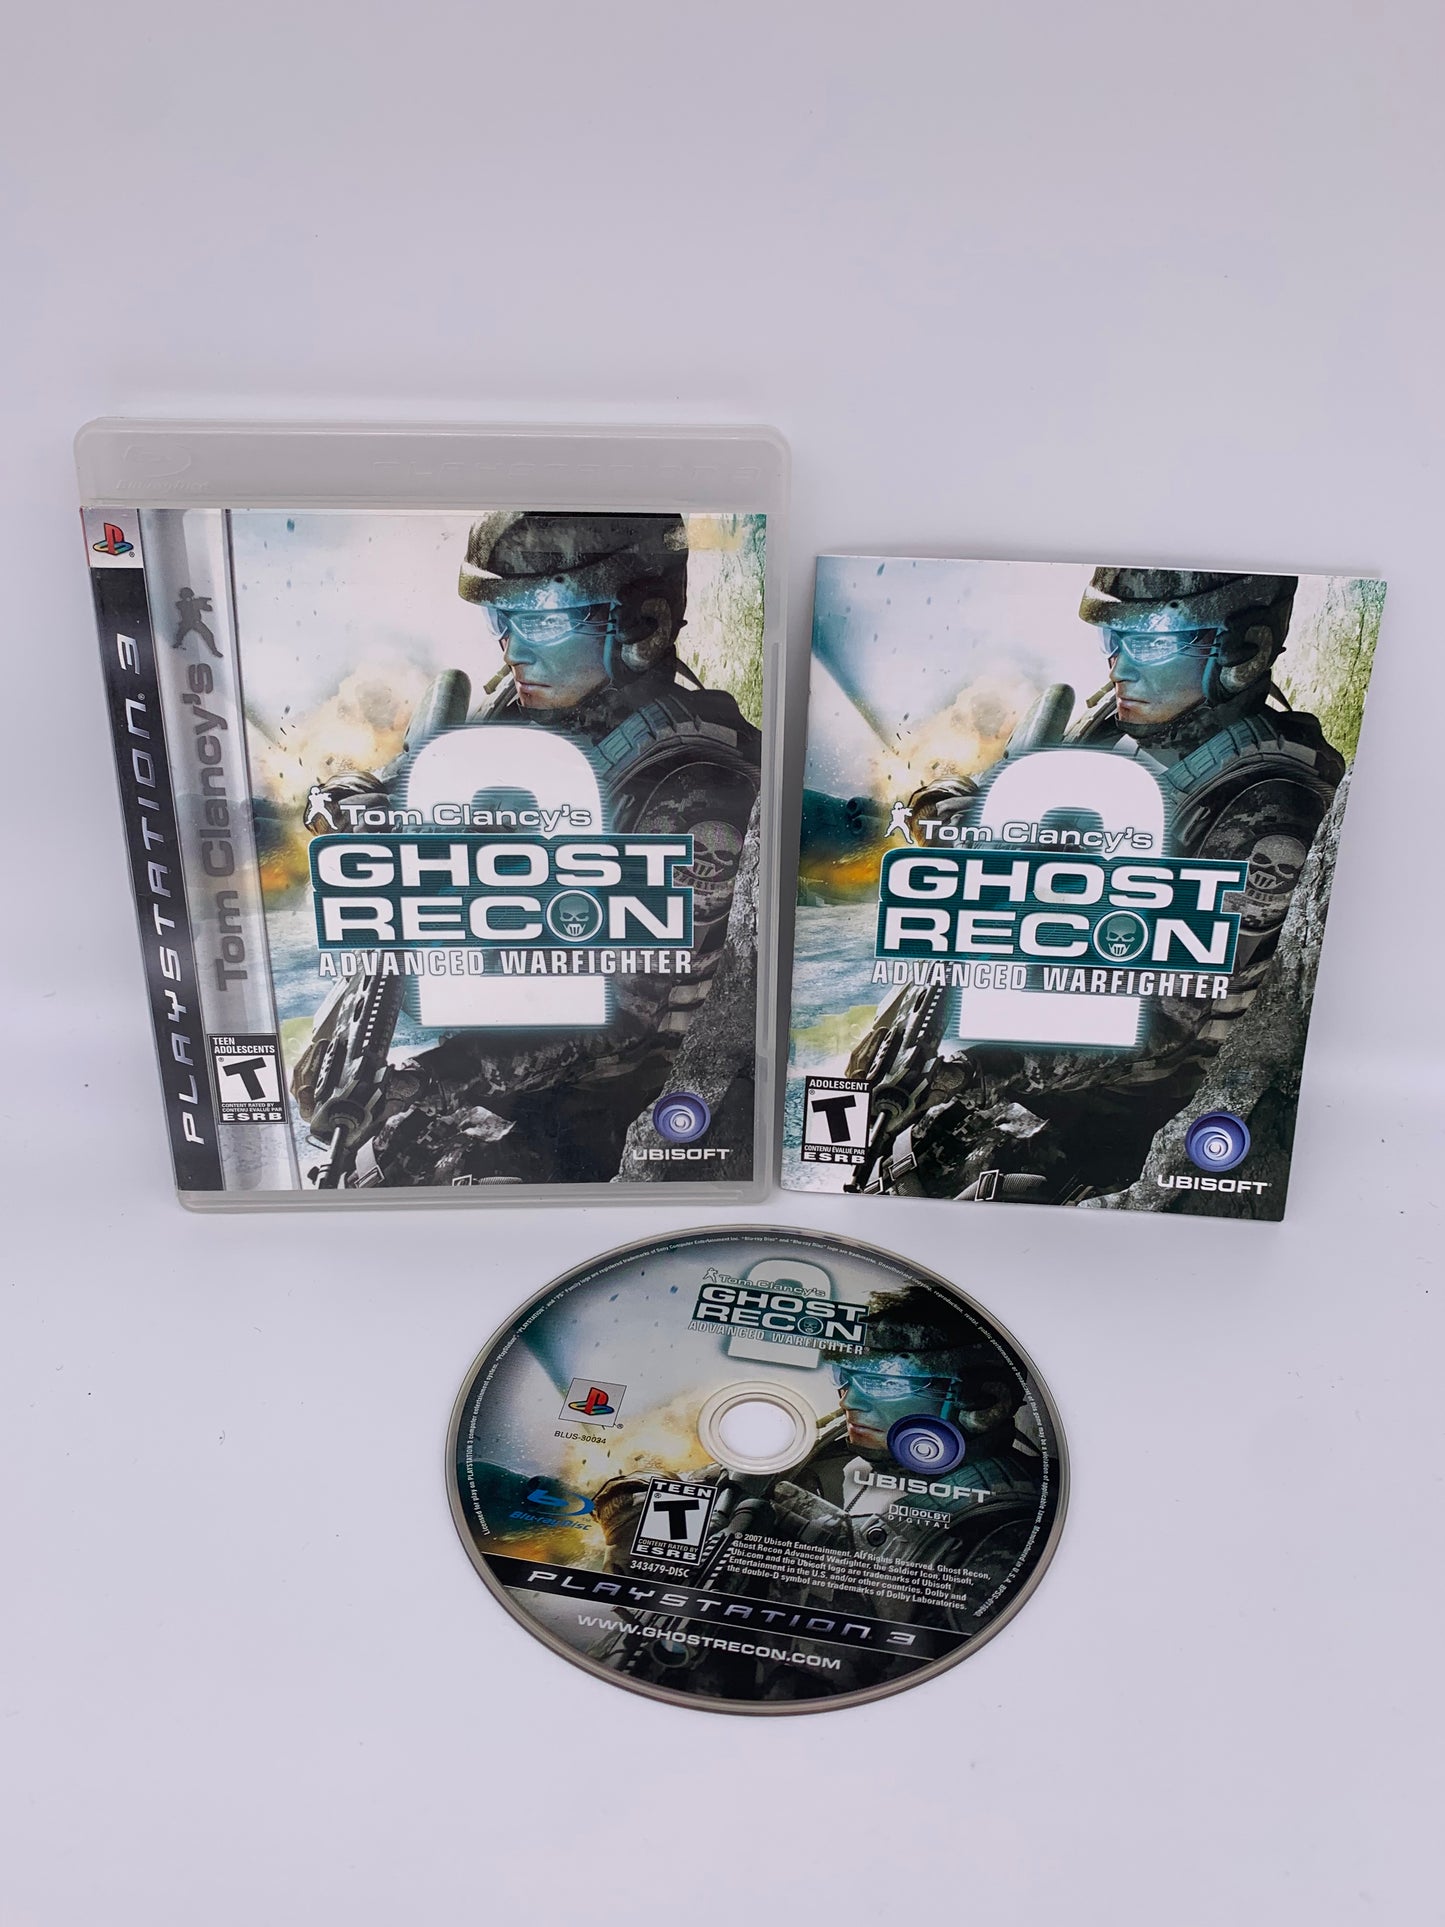 PiXEL-RETRO.COM : SONY PLAYSTATION 3 (PS3) COMPLET CIB BOX MANUAL GAME NTSC TOM CLANCY'S GHOST RECON ADVANCED WARFIGHTER 2